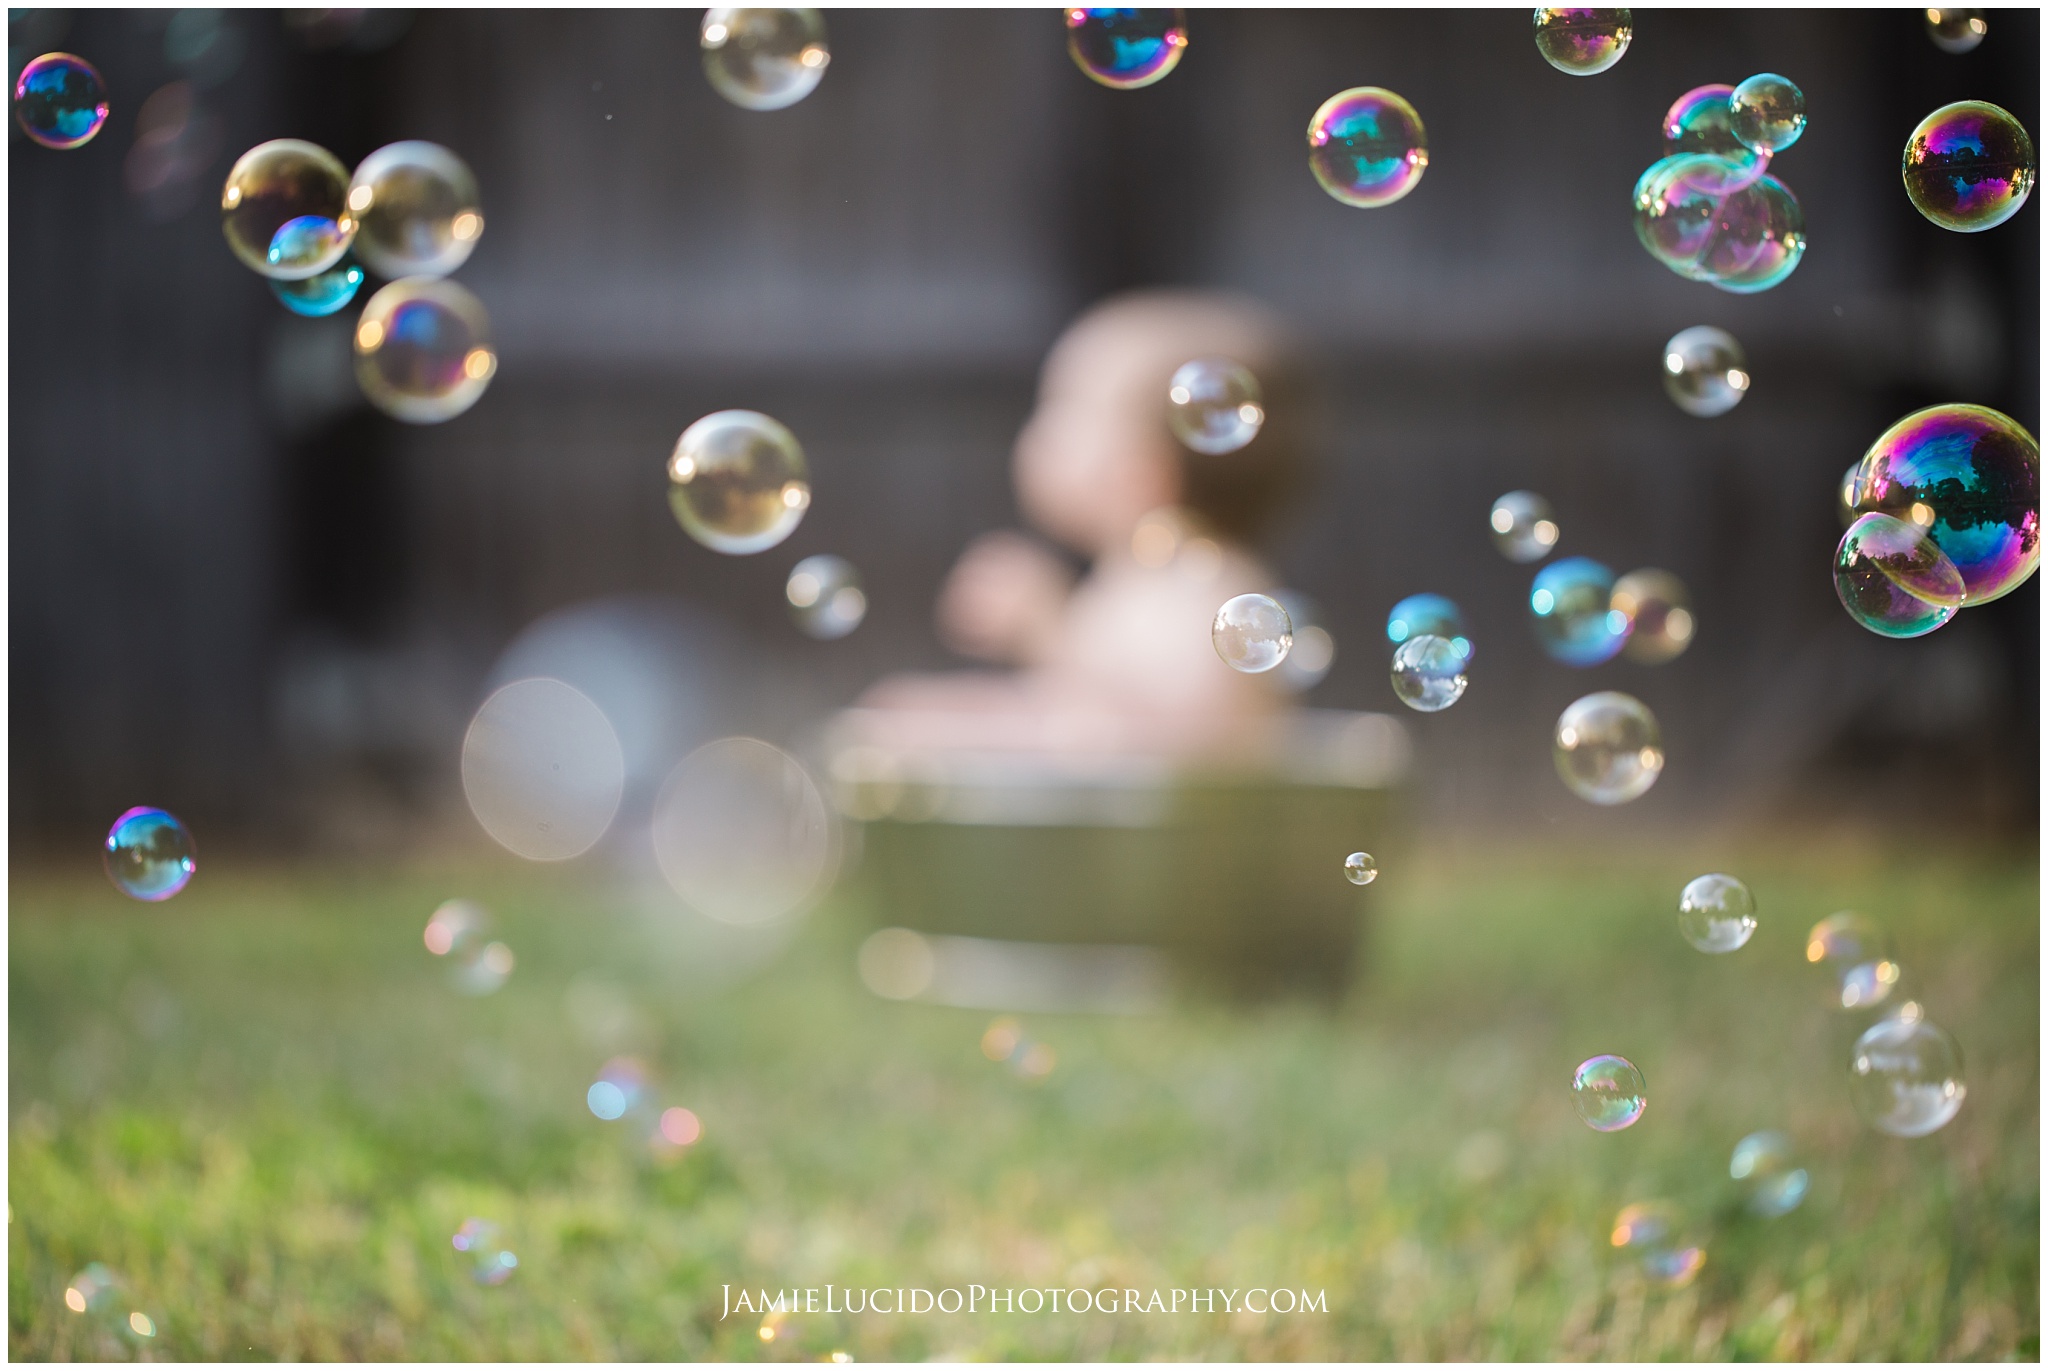 bubbles, outdoor bath, bubble bath, lifestyle photographer, first birthday cake smash, birthday clean up, bubble bath with baby